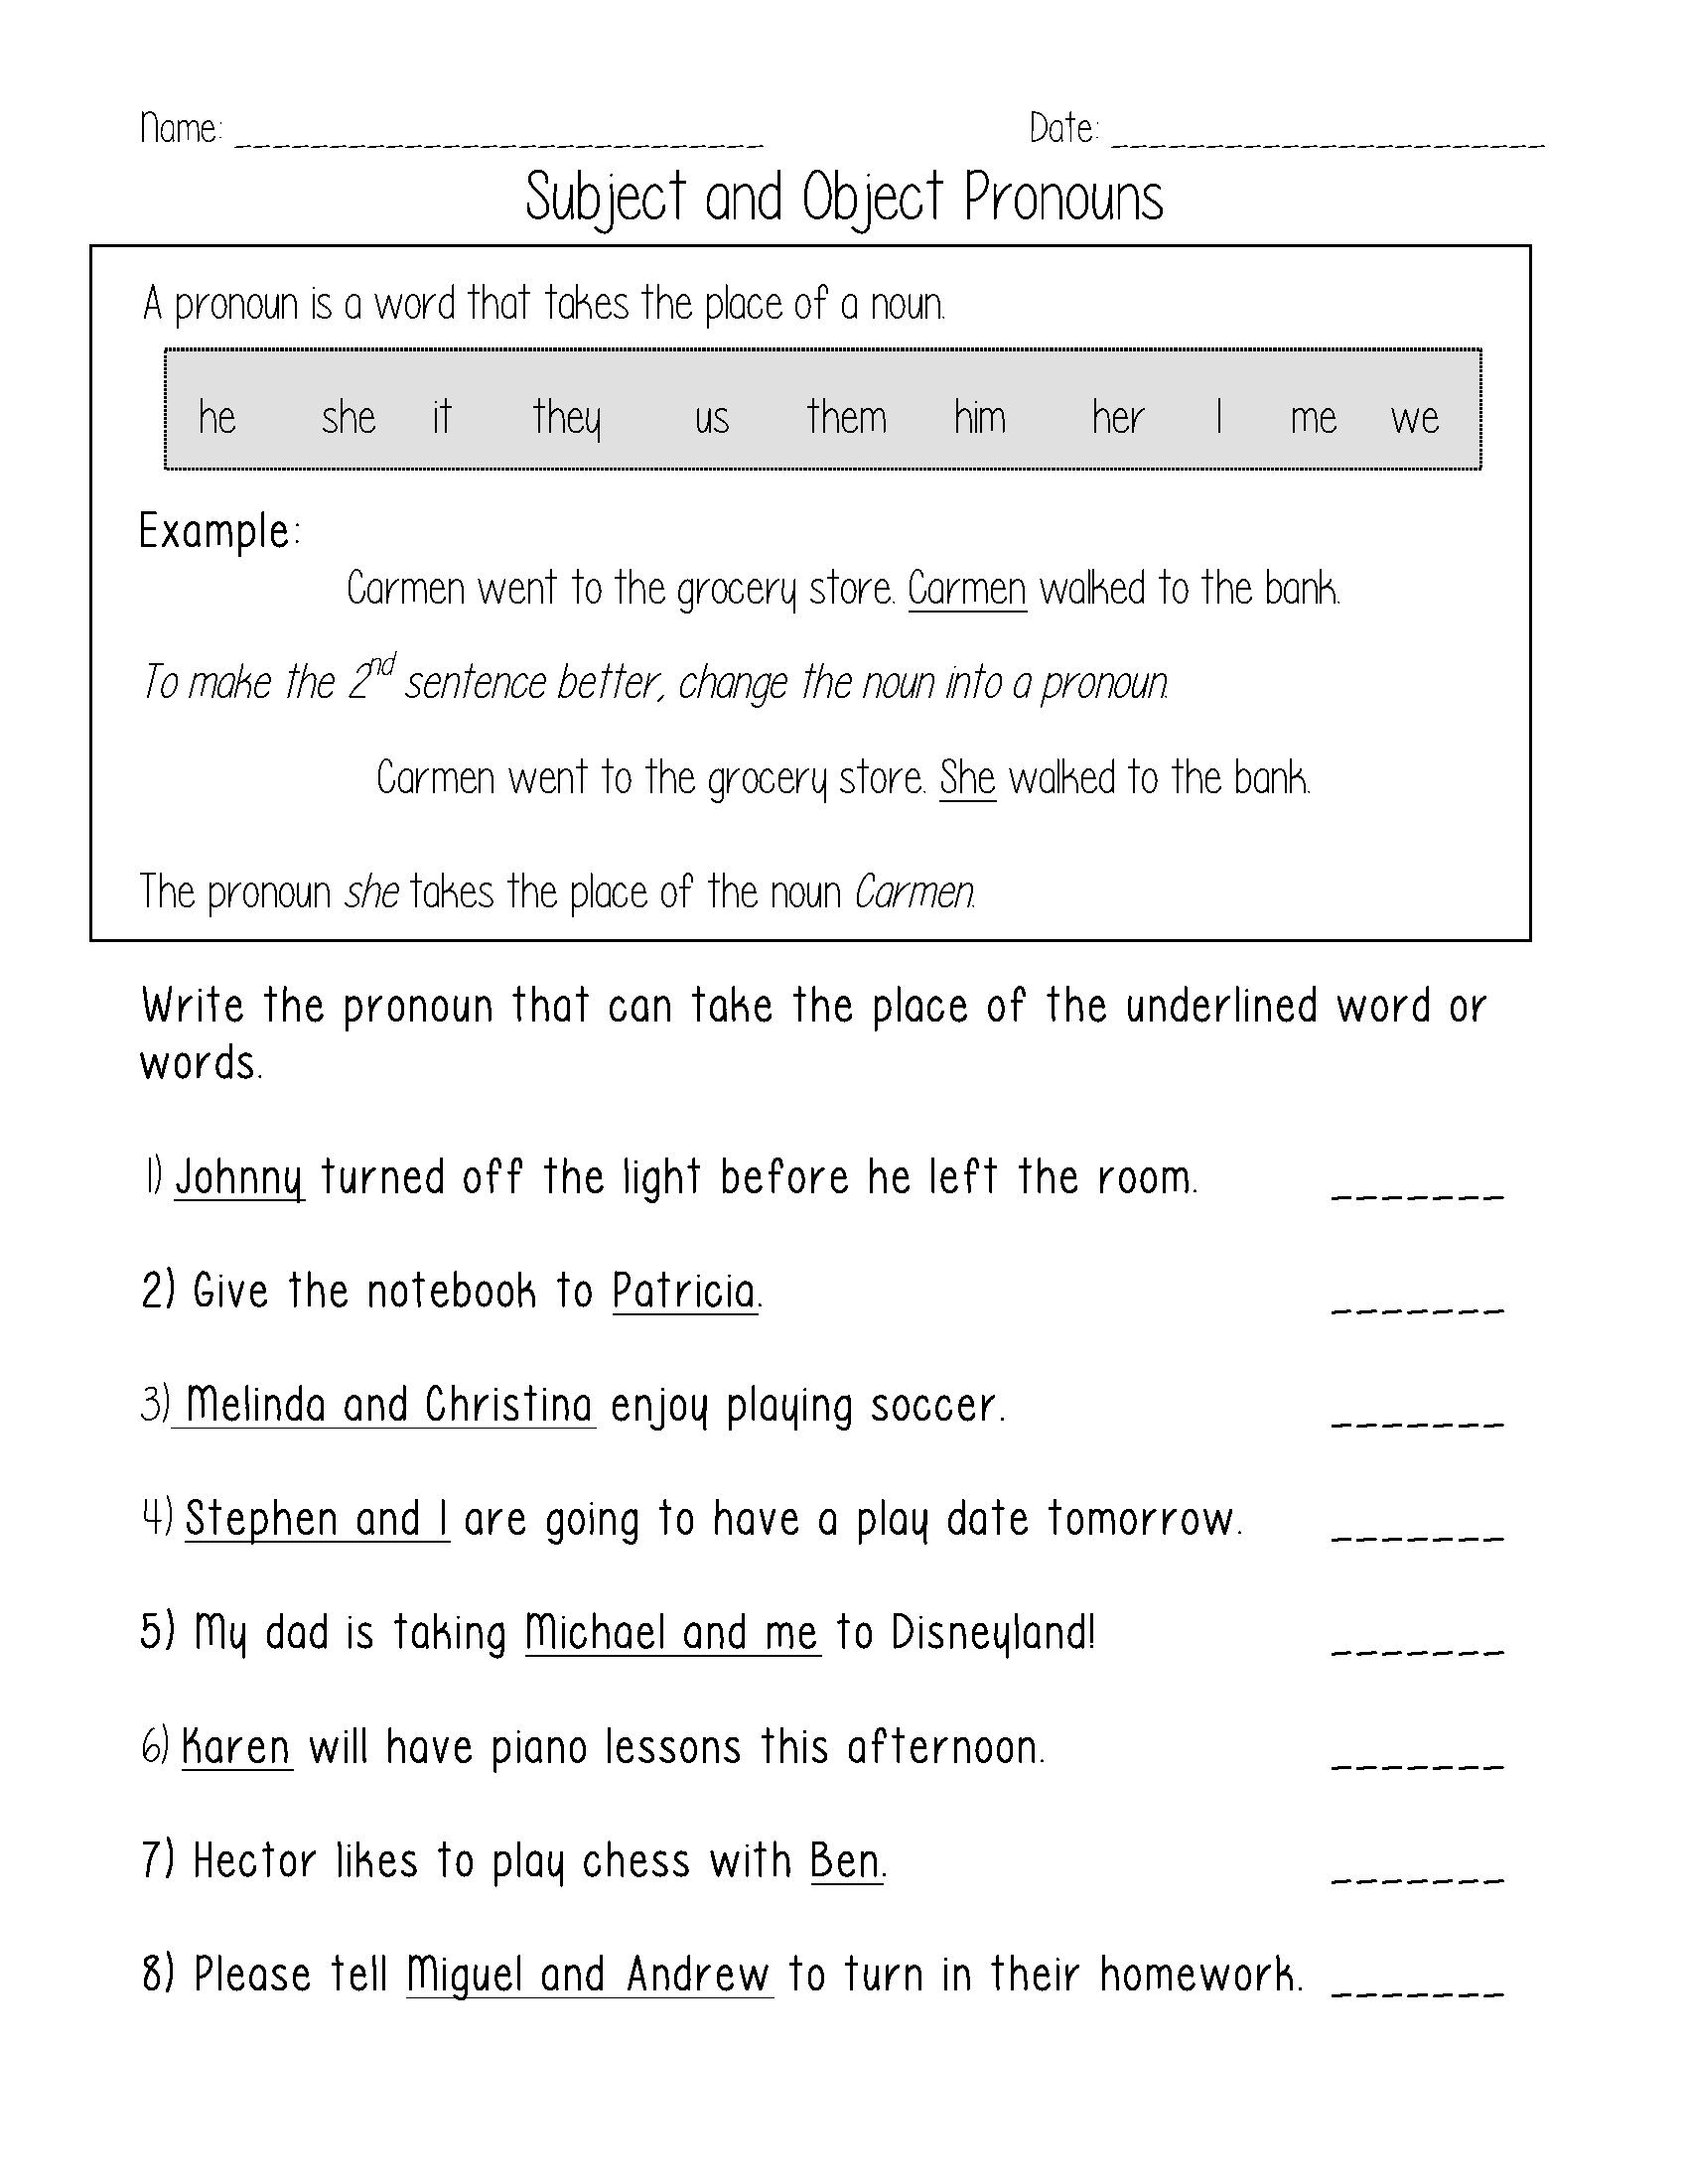 14 Best Images Of Pronoun Contractions Worksheet Contractions Printable Worksheets Pronouns